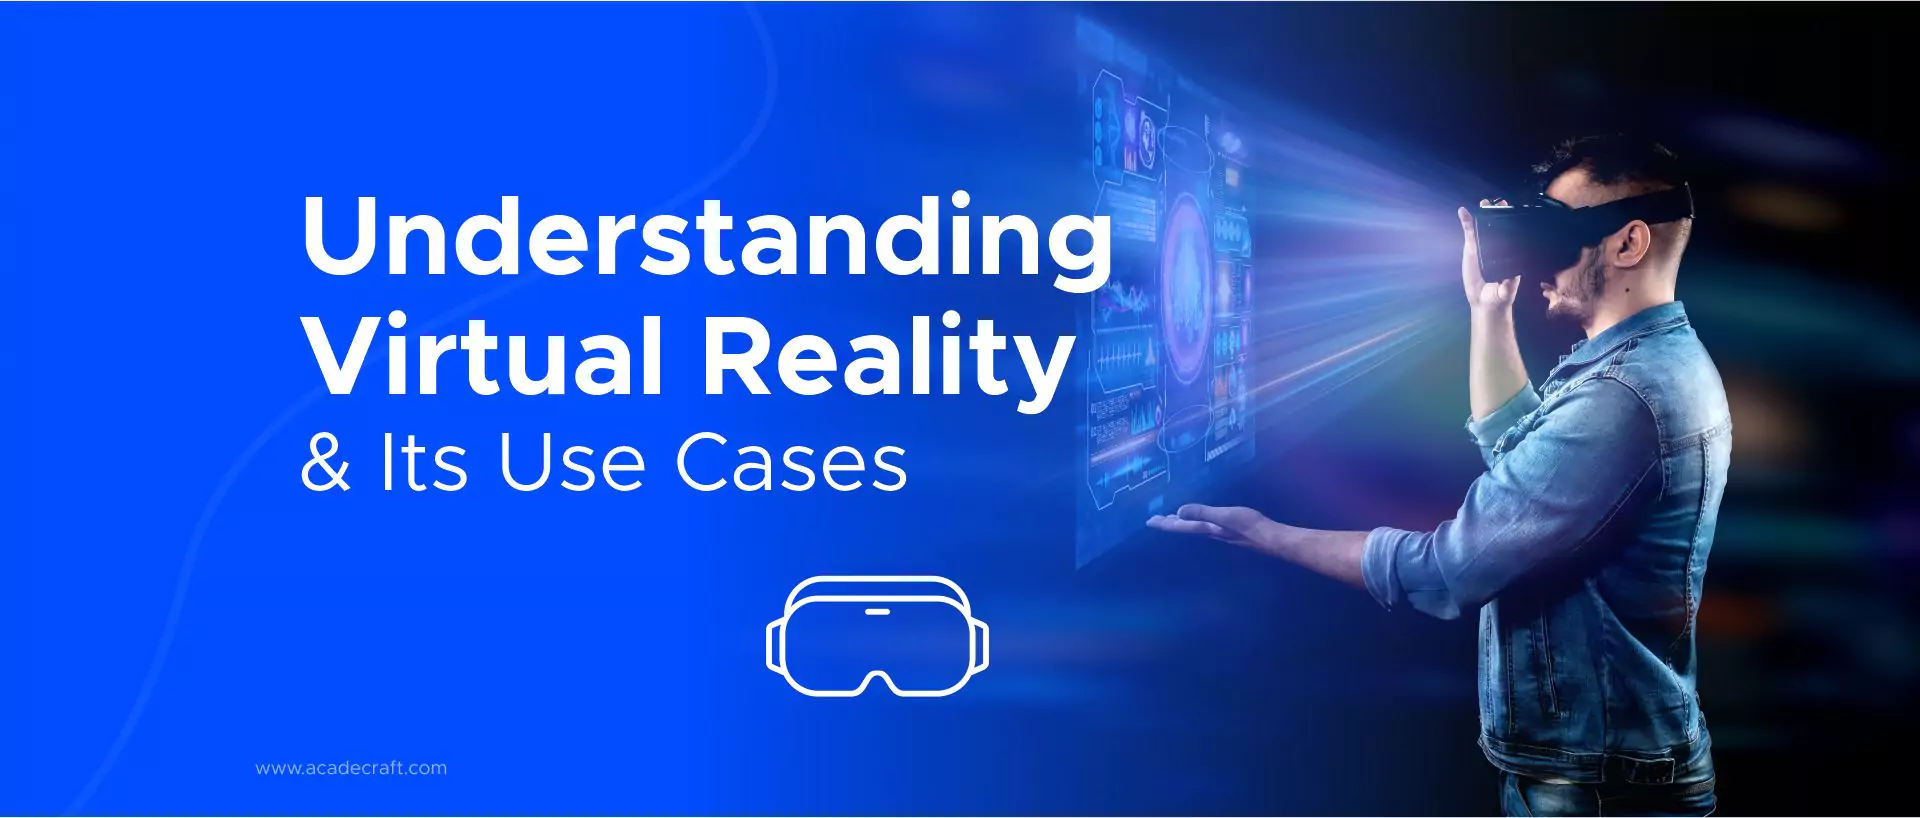 Understanding Virtual Reality & Its Use Cases